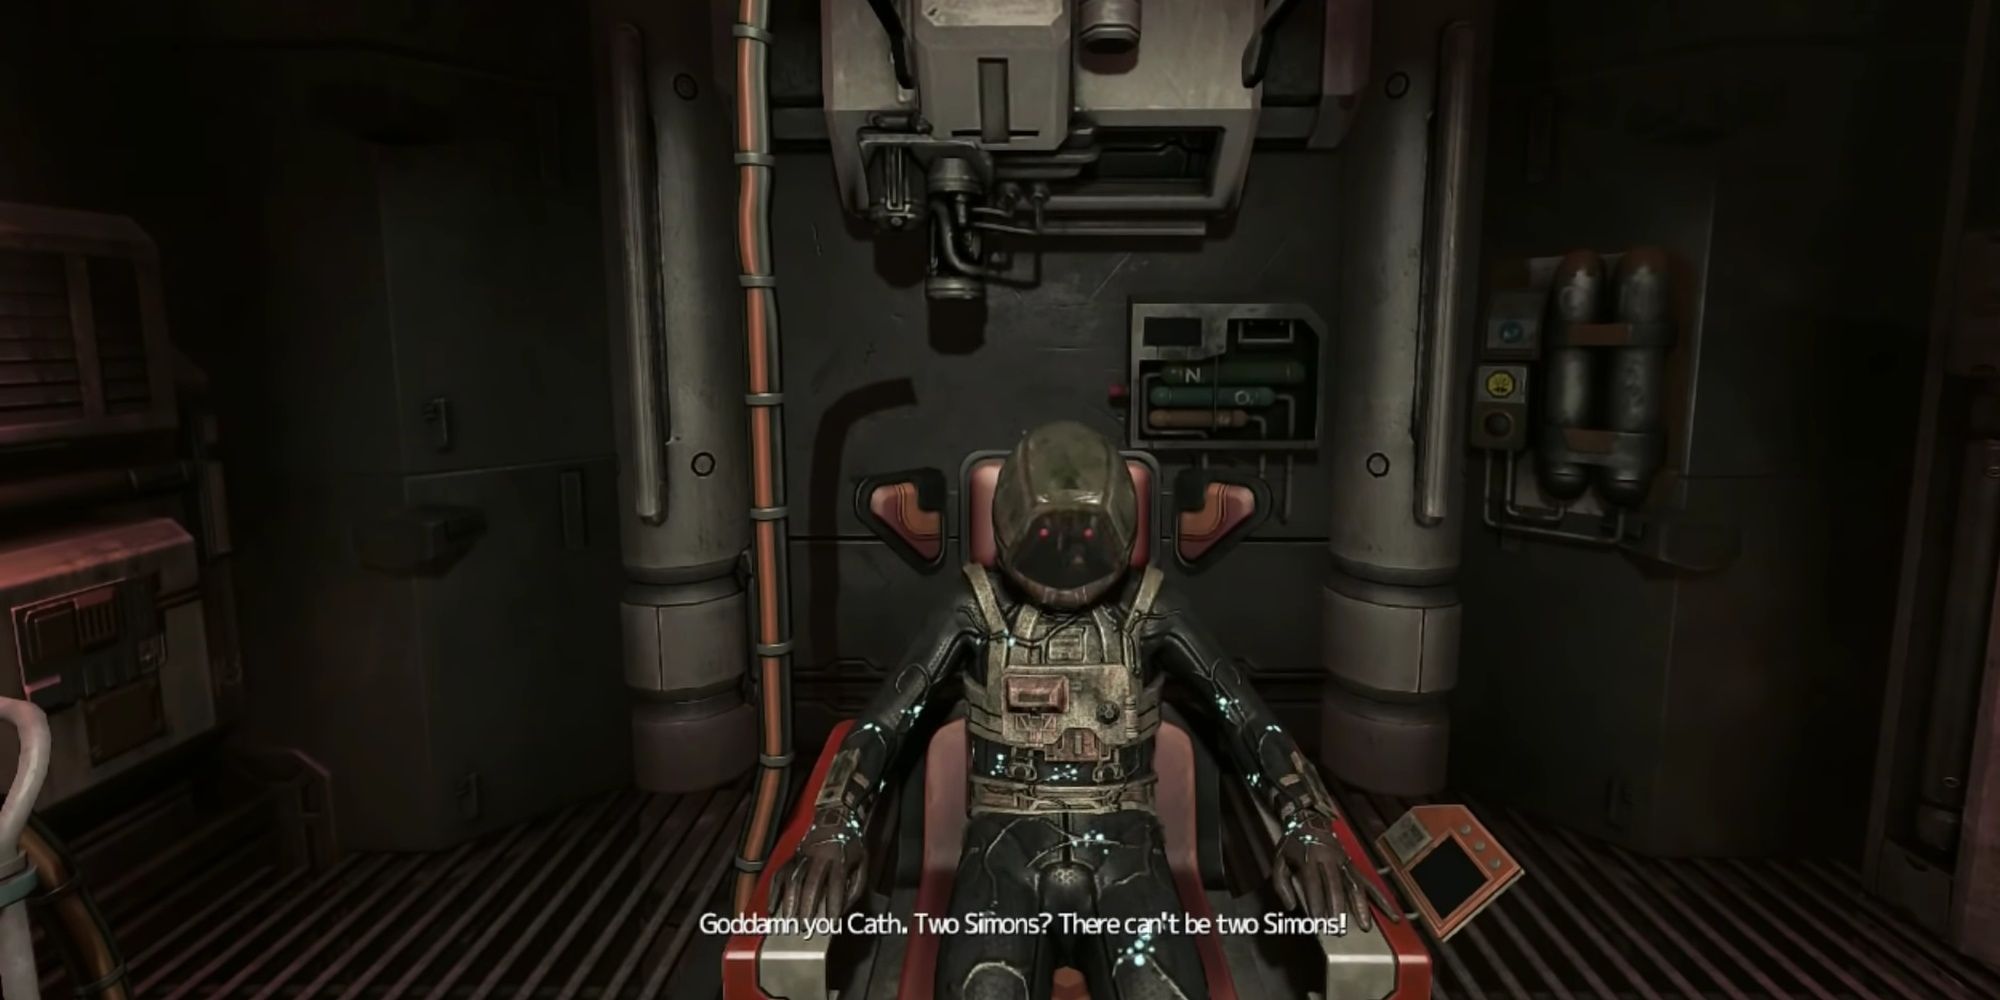 Soma: Simon In The Heavy Suit Looking At His Original Copy